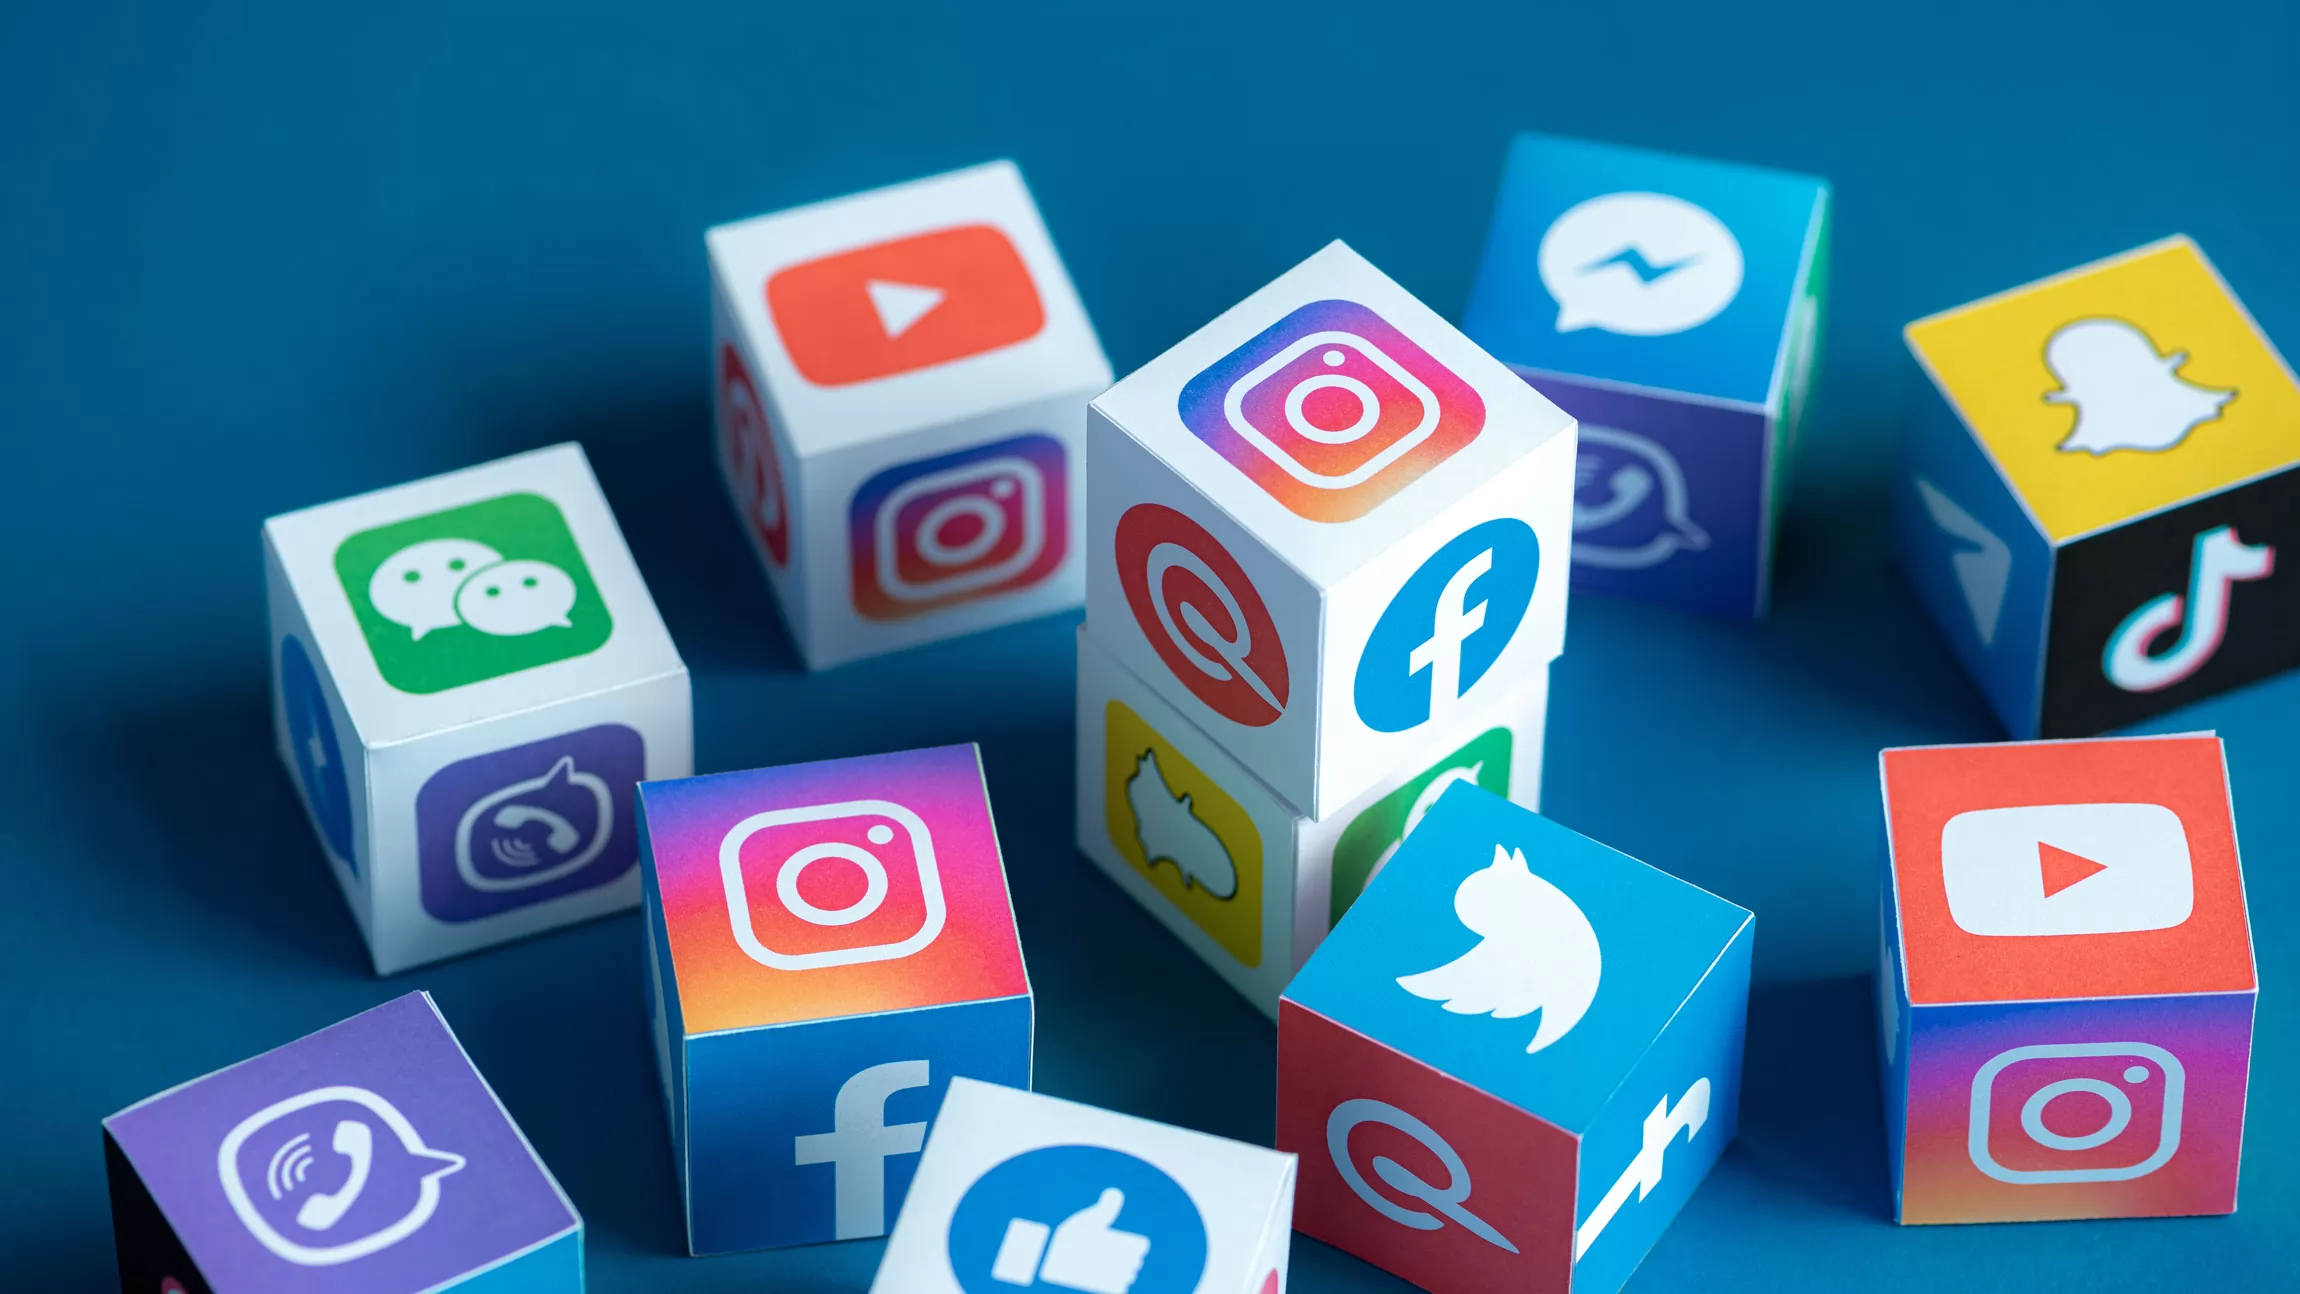 Using social media to market your IT business